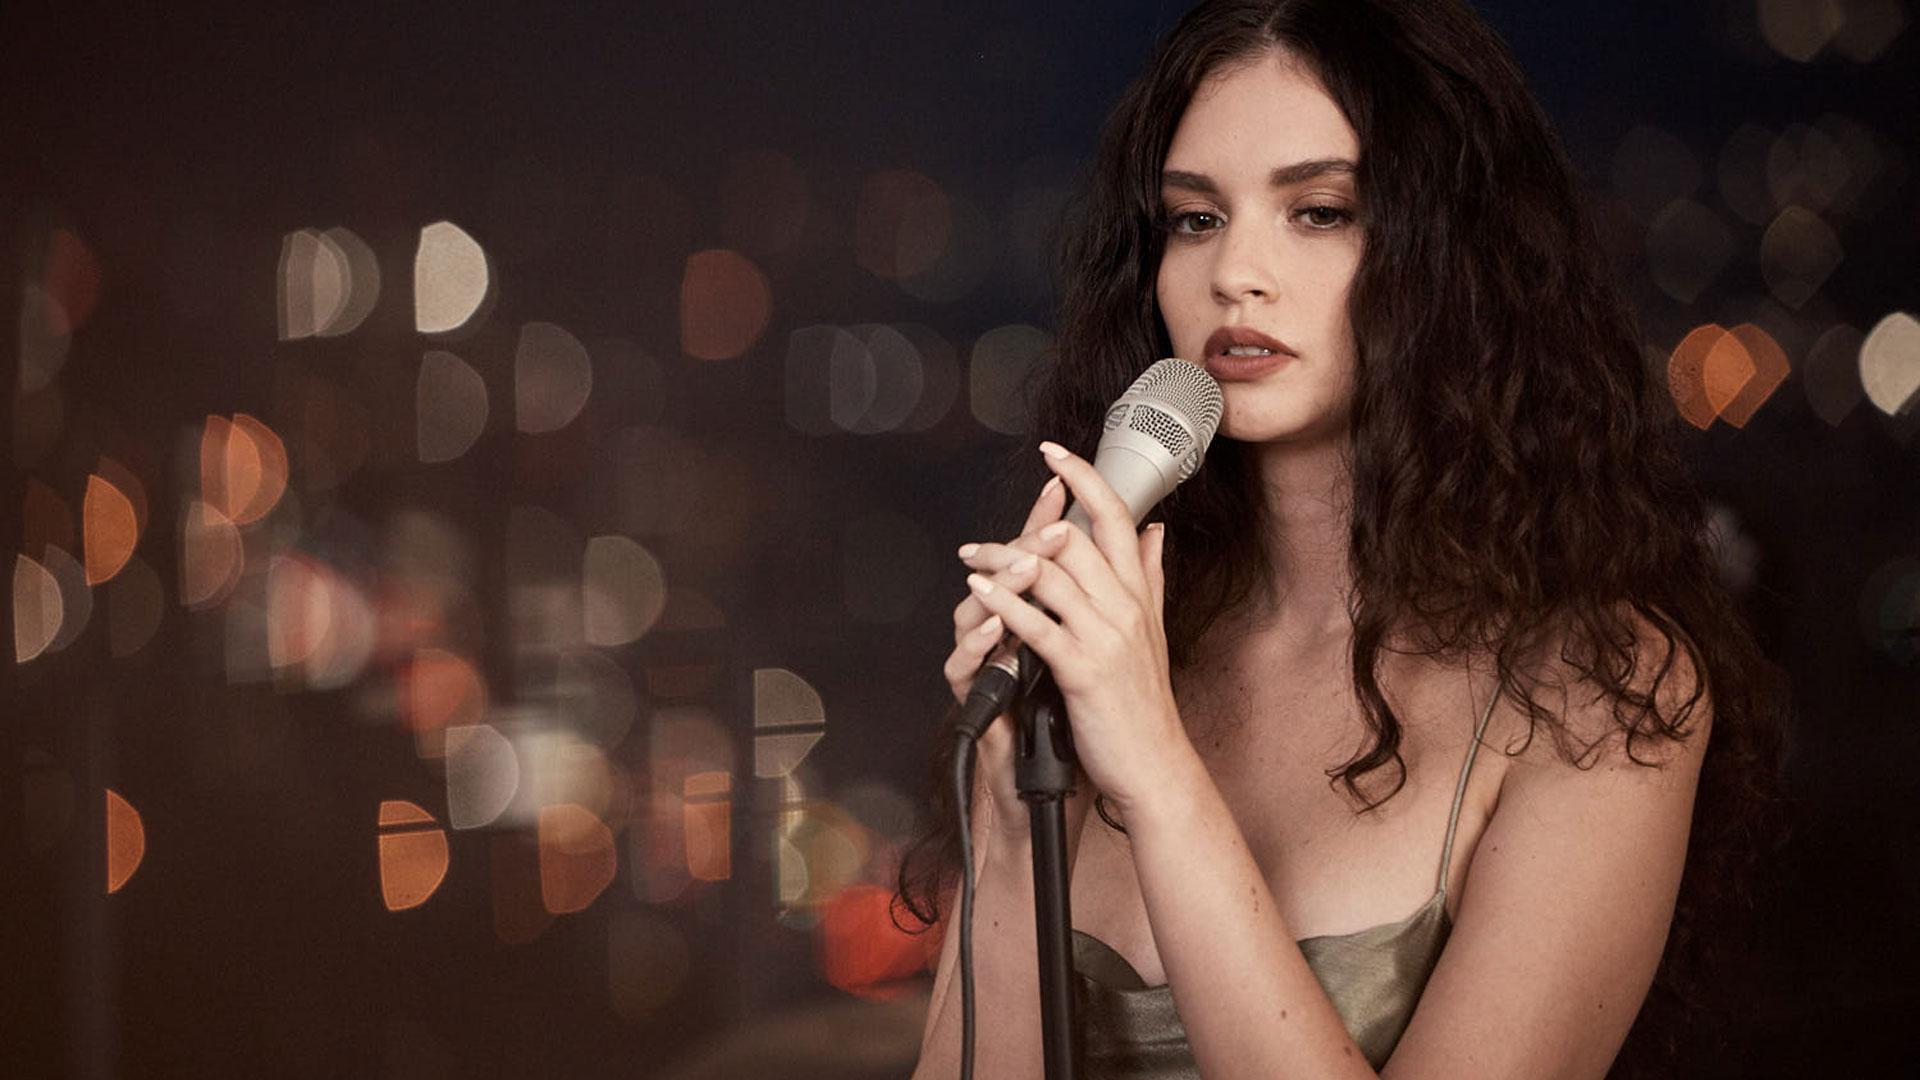 Sabrina Claudio To Perform On The Late Late Show As Part of Apple.